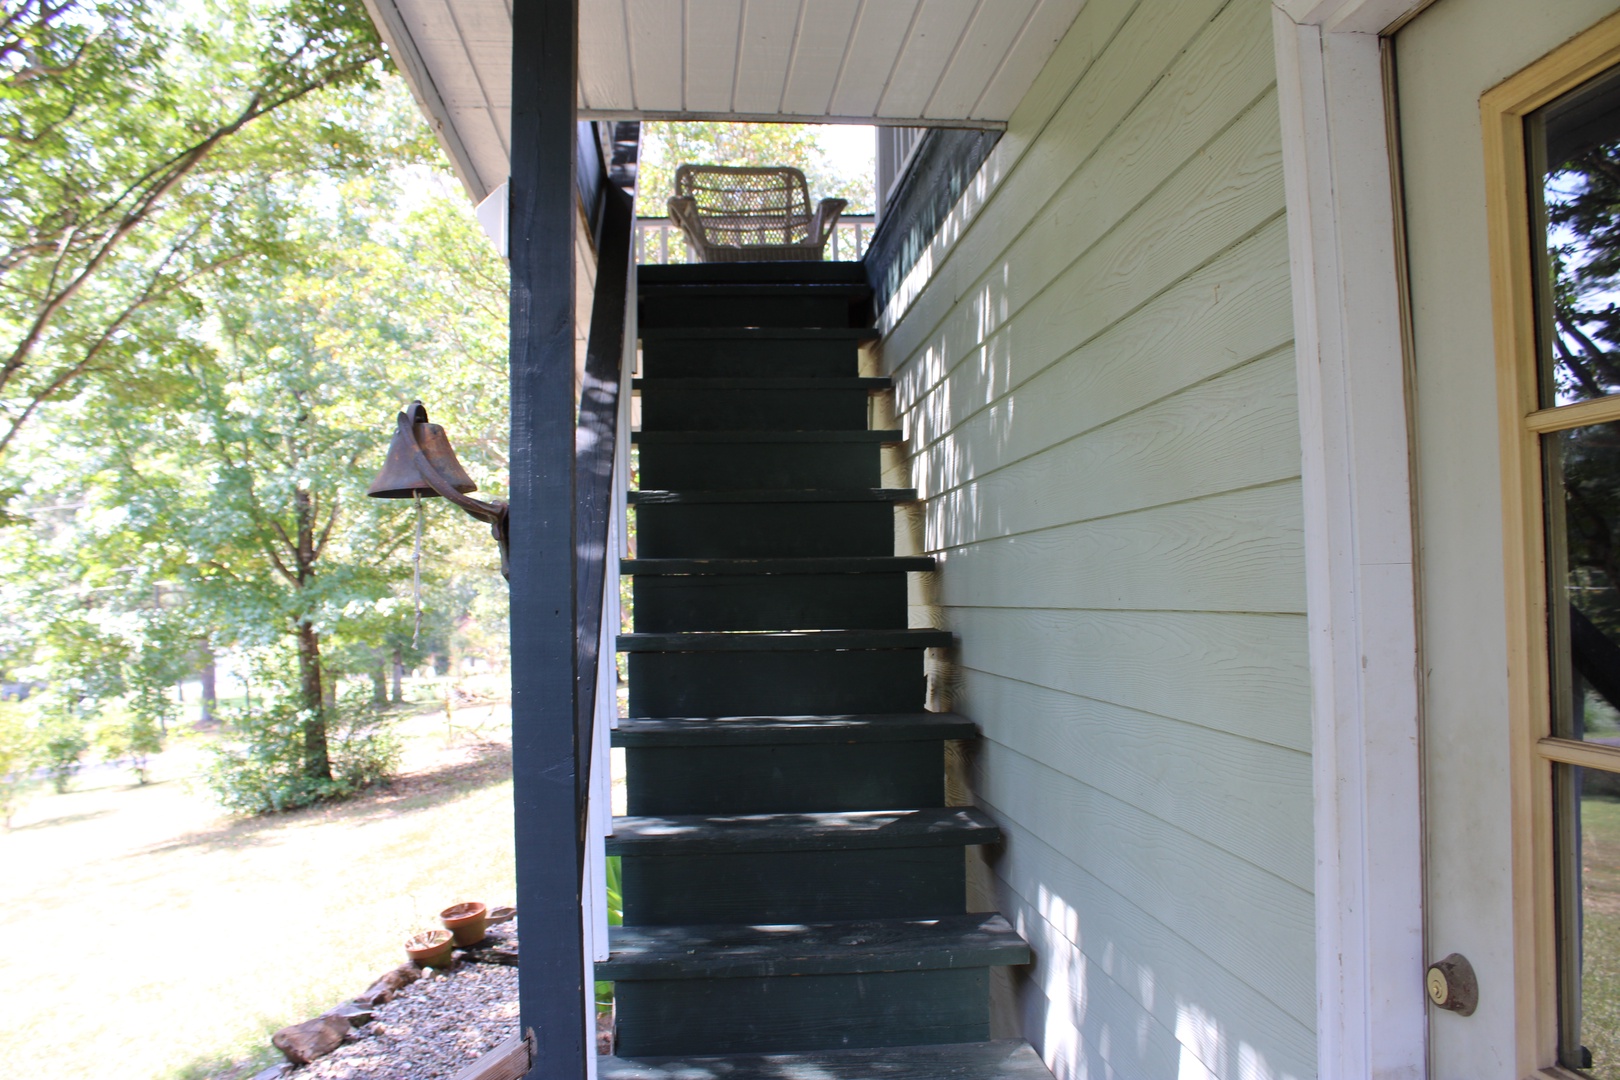 Head up the exterior staircase to the main entrance of this charming home